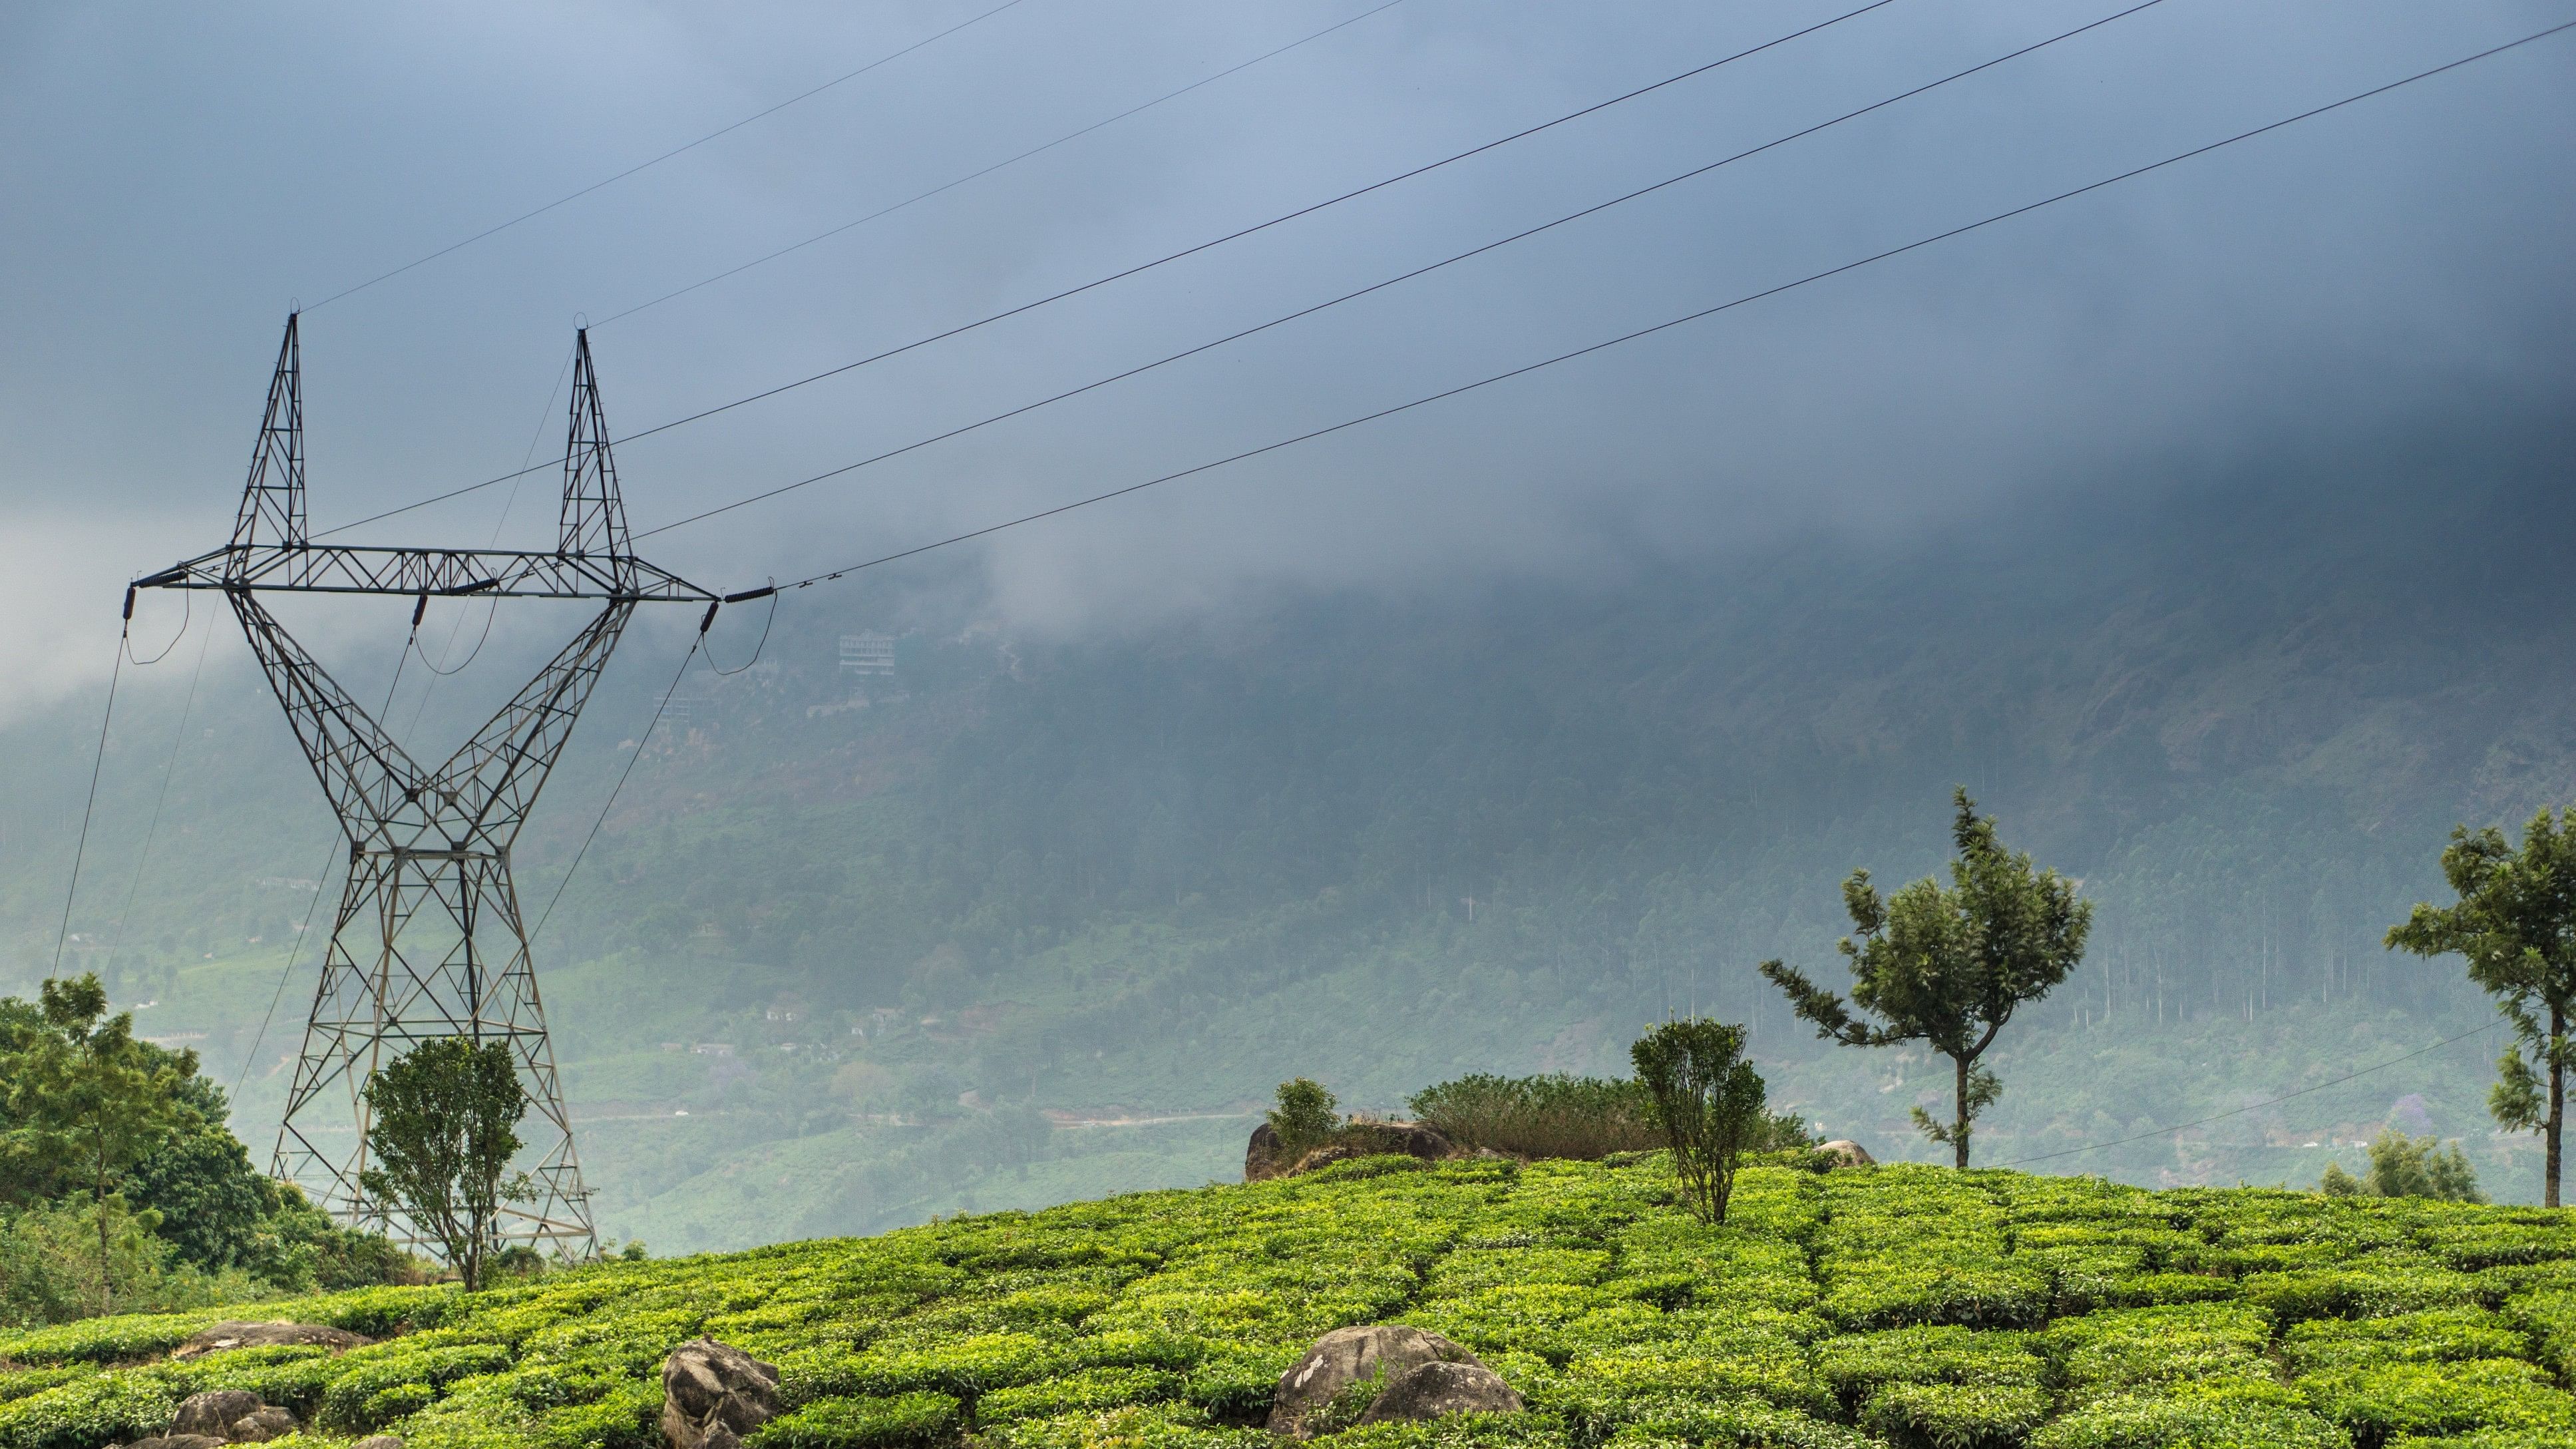 <div class="paragraphs"><p>In India, one of Munnar’s tea plantations. A transmission tower, also called electric pylon, and the Western Ghats mountains are visible in the image. </p></div>